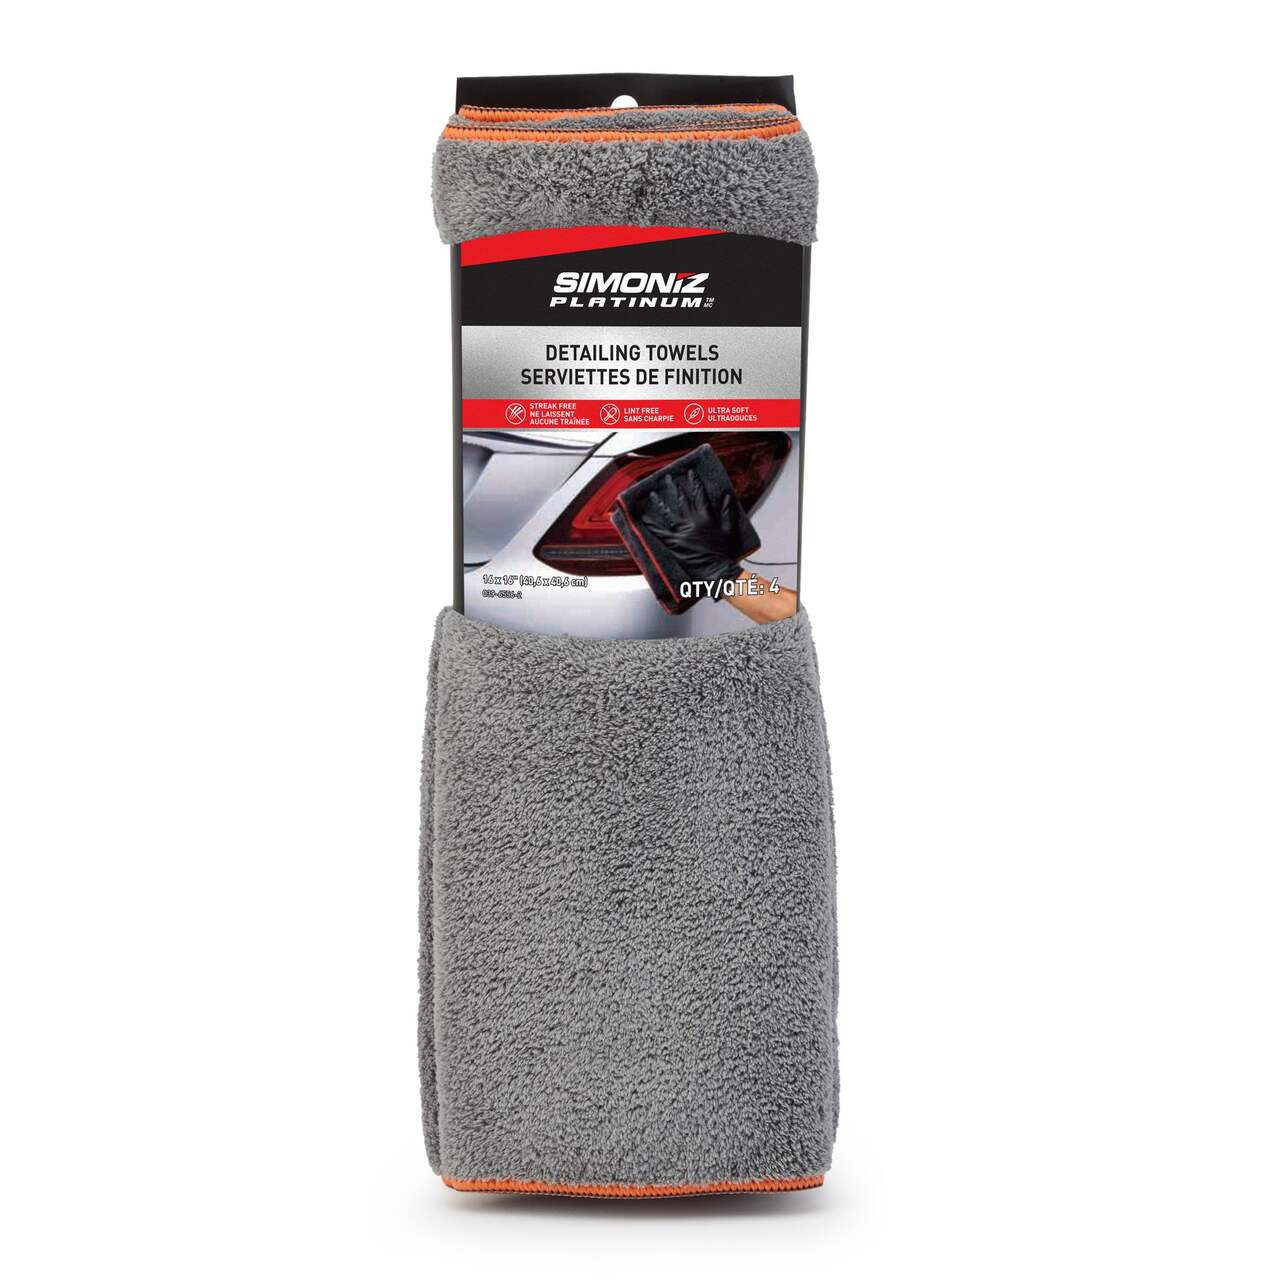 https://media-www.canadiantire.ca/product/automotive/car-care-accessories/auto-cleaning-tools/0396556/simoniz-platinum-lint-free-detailing-towels-4pk-d7a4f763-5467-4a4a-ba02-5cde582052d3-jpgrendition.jpg?imdensity=1&imwidth=640&impolicy=mZoom